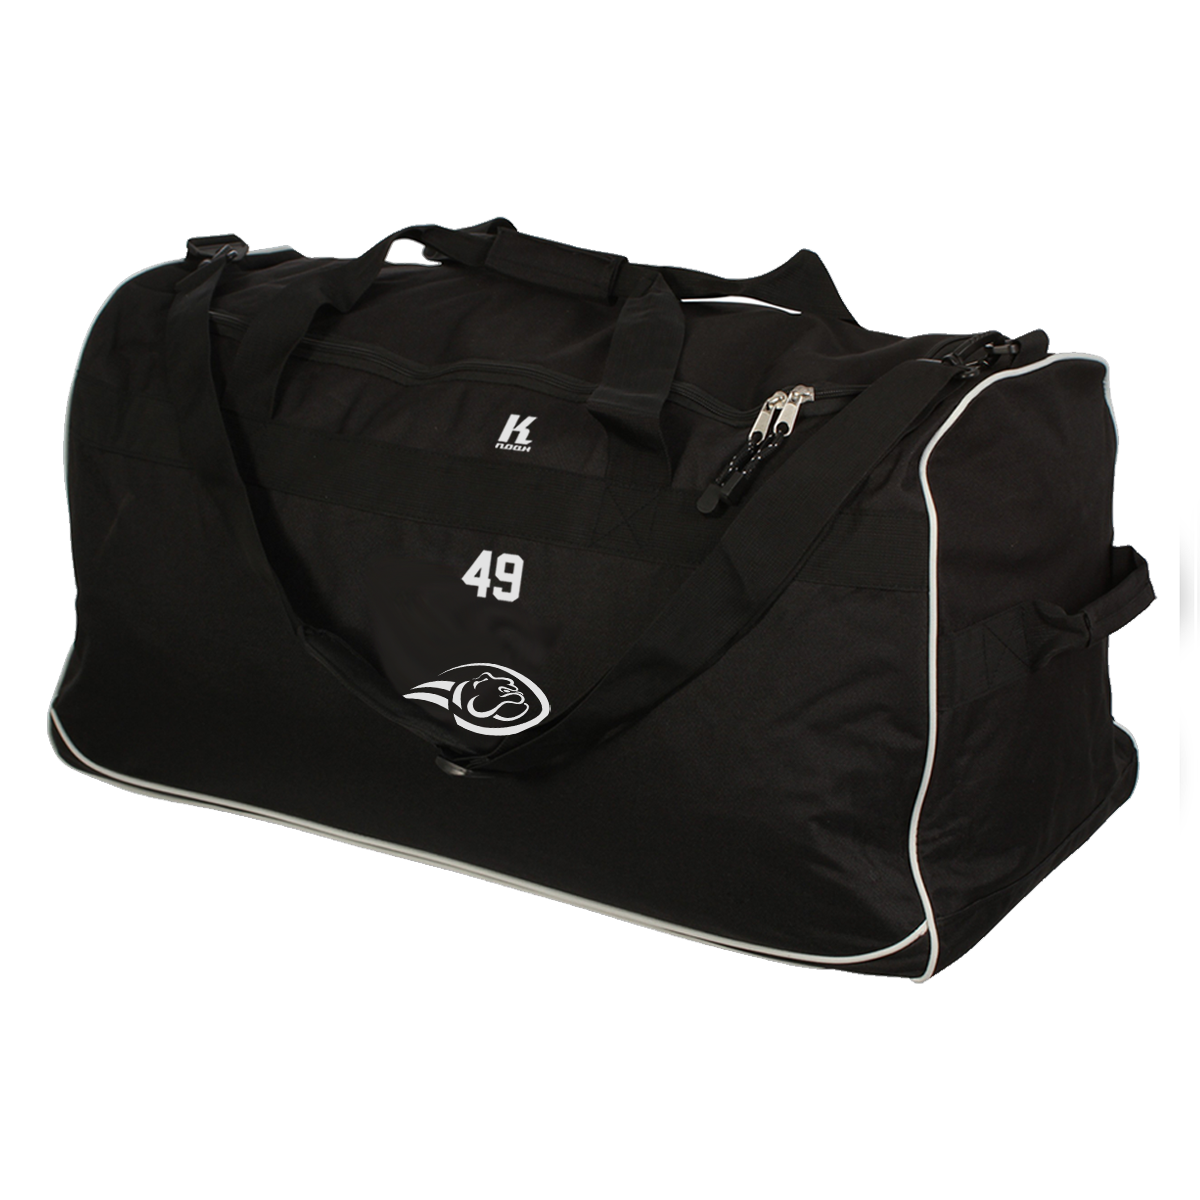 Wilddogs Jumbo Team Kitbag with Playernumber or Initials